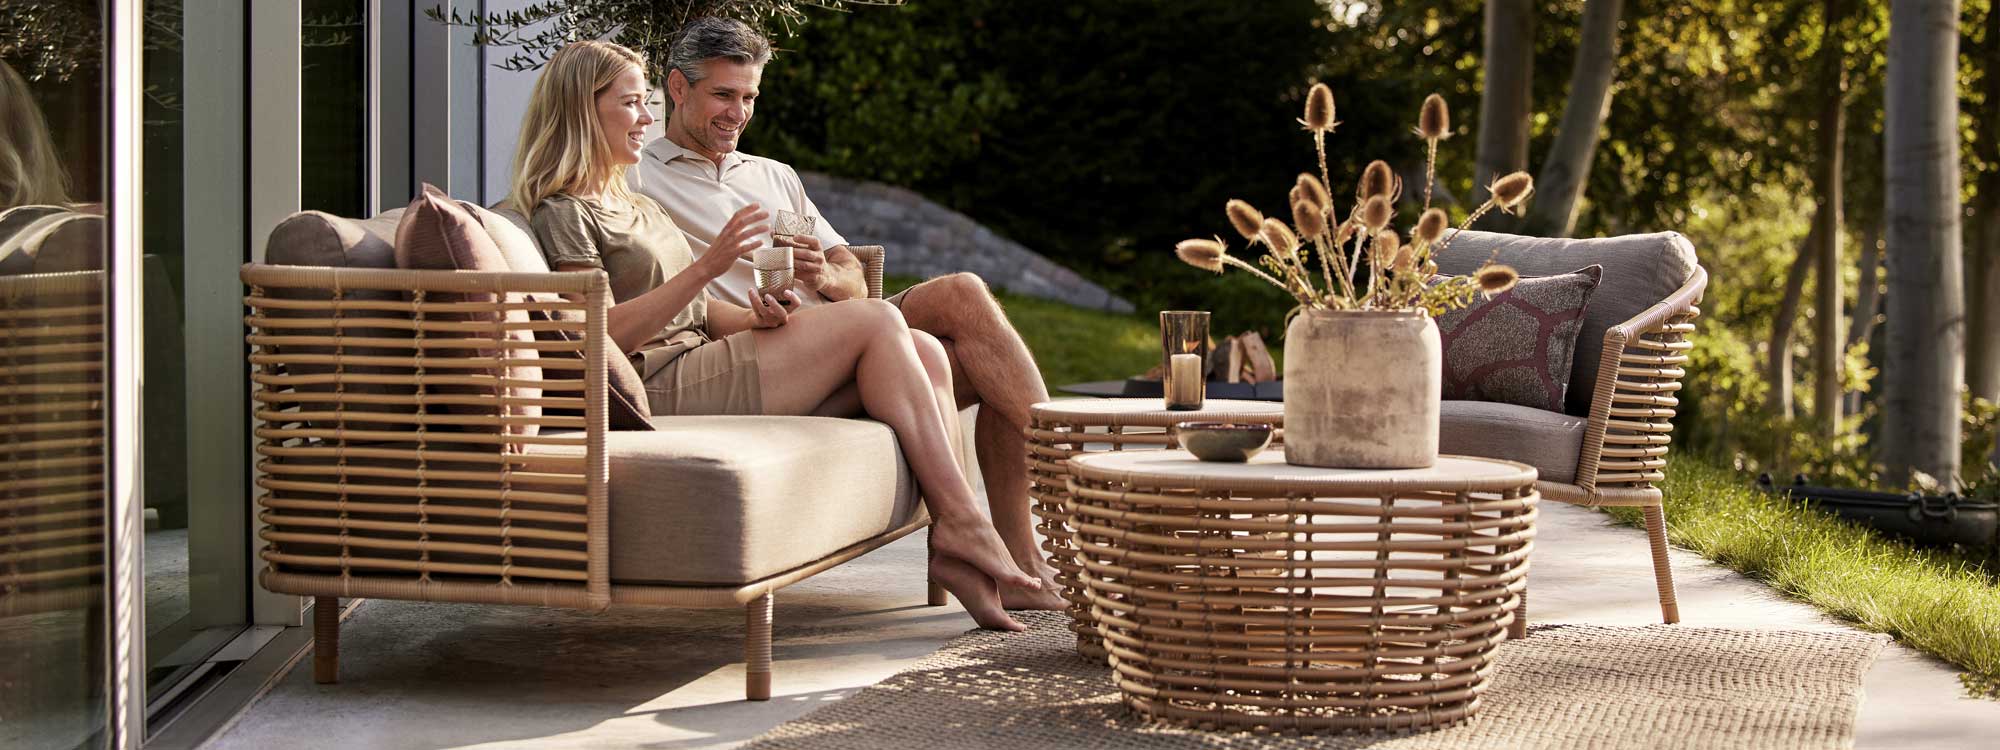 Image of couple sat on Sense synthetic cane sofa next to Basket low table by Cane-line outdoor furniture